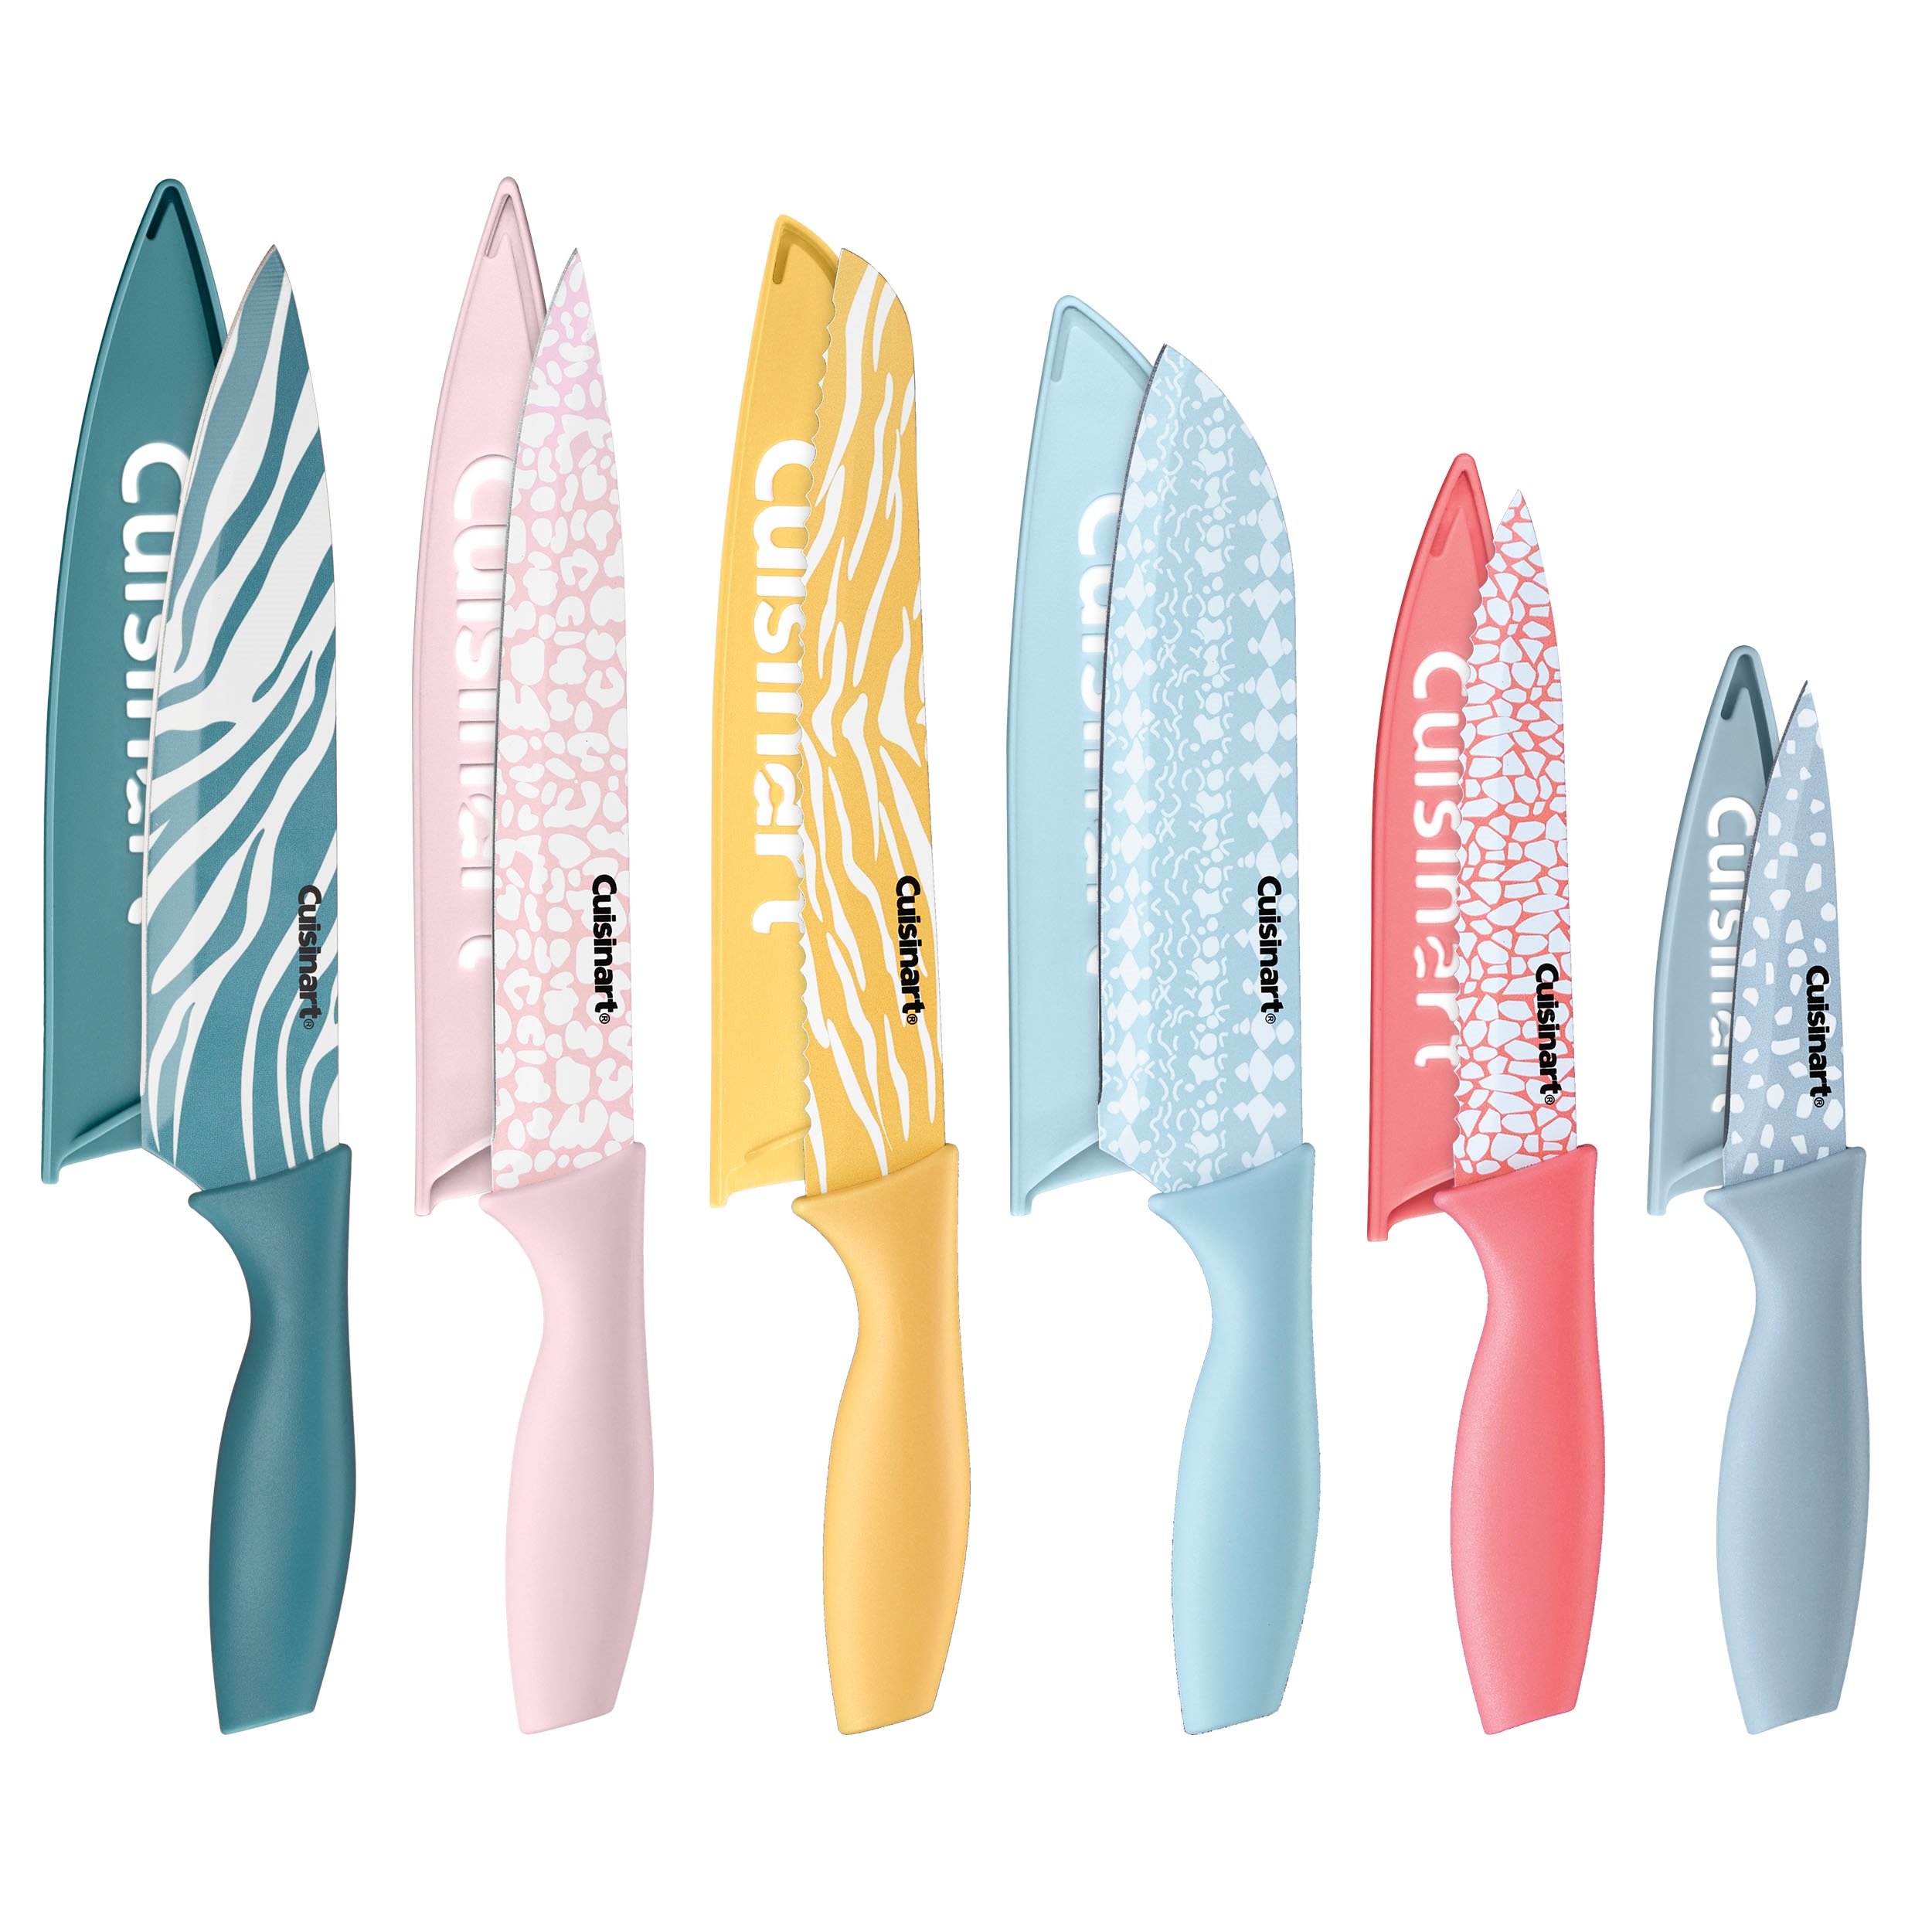 12 piece Animal Print Color Knife Set with Blade Guards